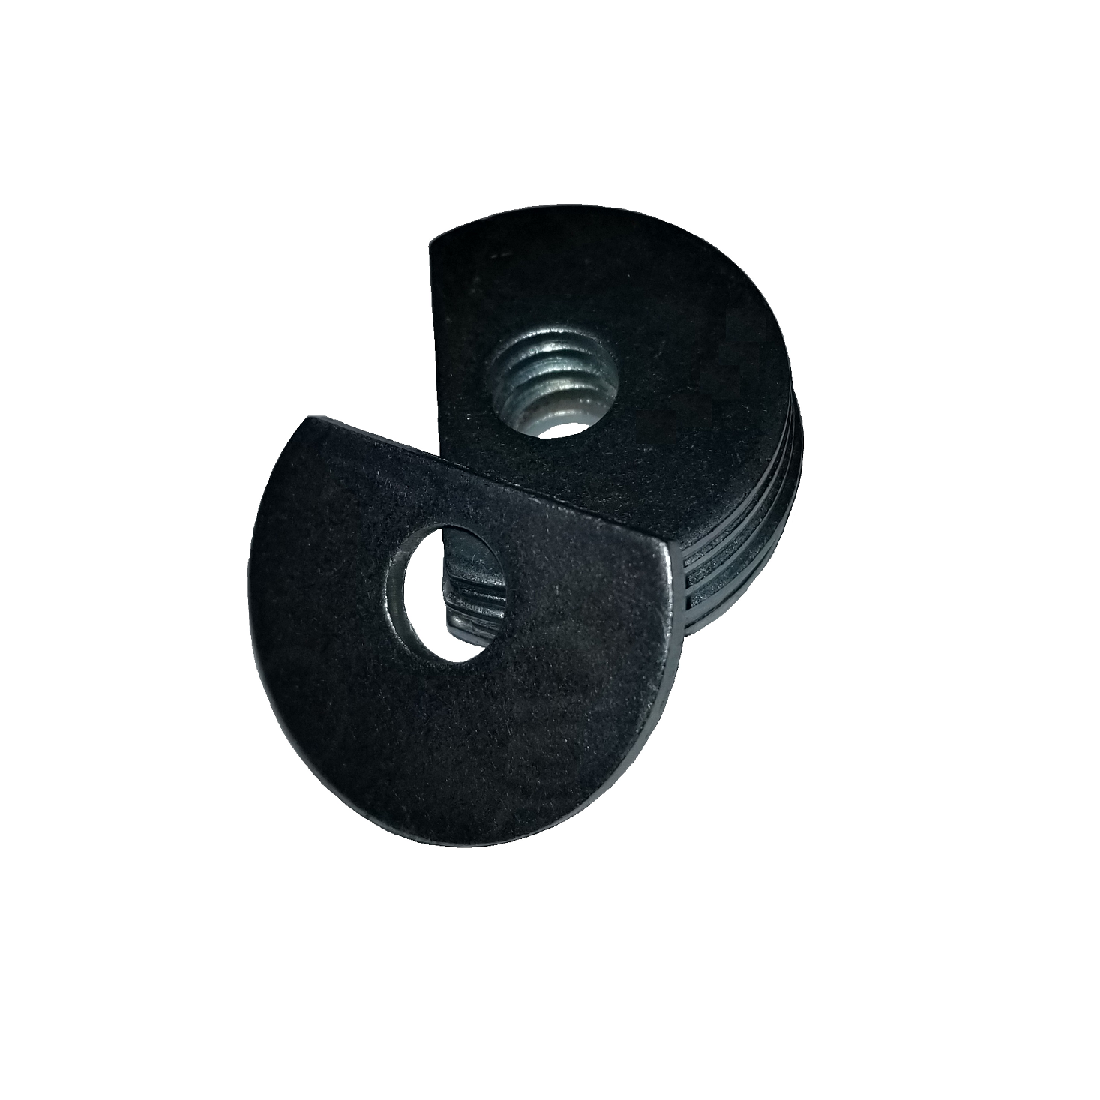 Clipped OD Washer - 0.812 ID, 1.469 OD, 0.120 Thick, Low Carbon Steel - Soft, Zinc & Clear